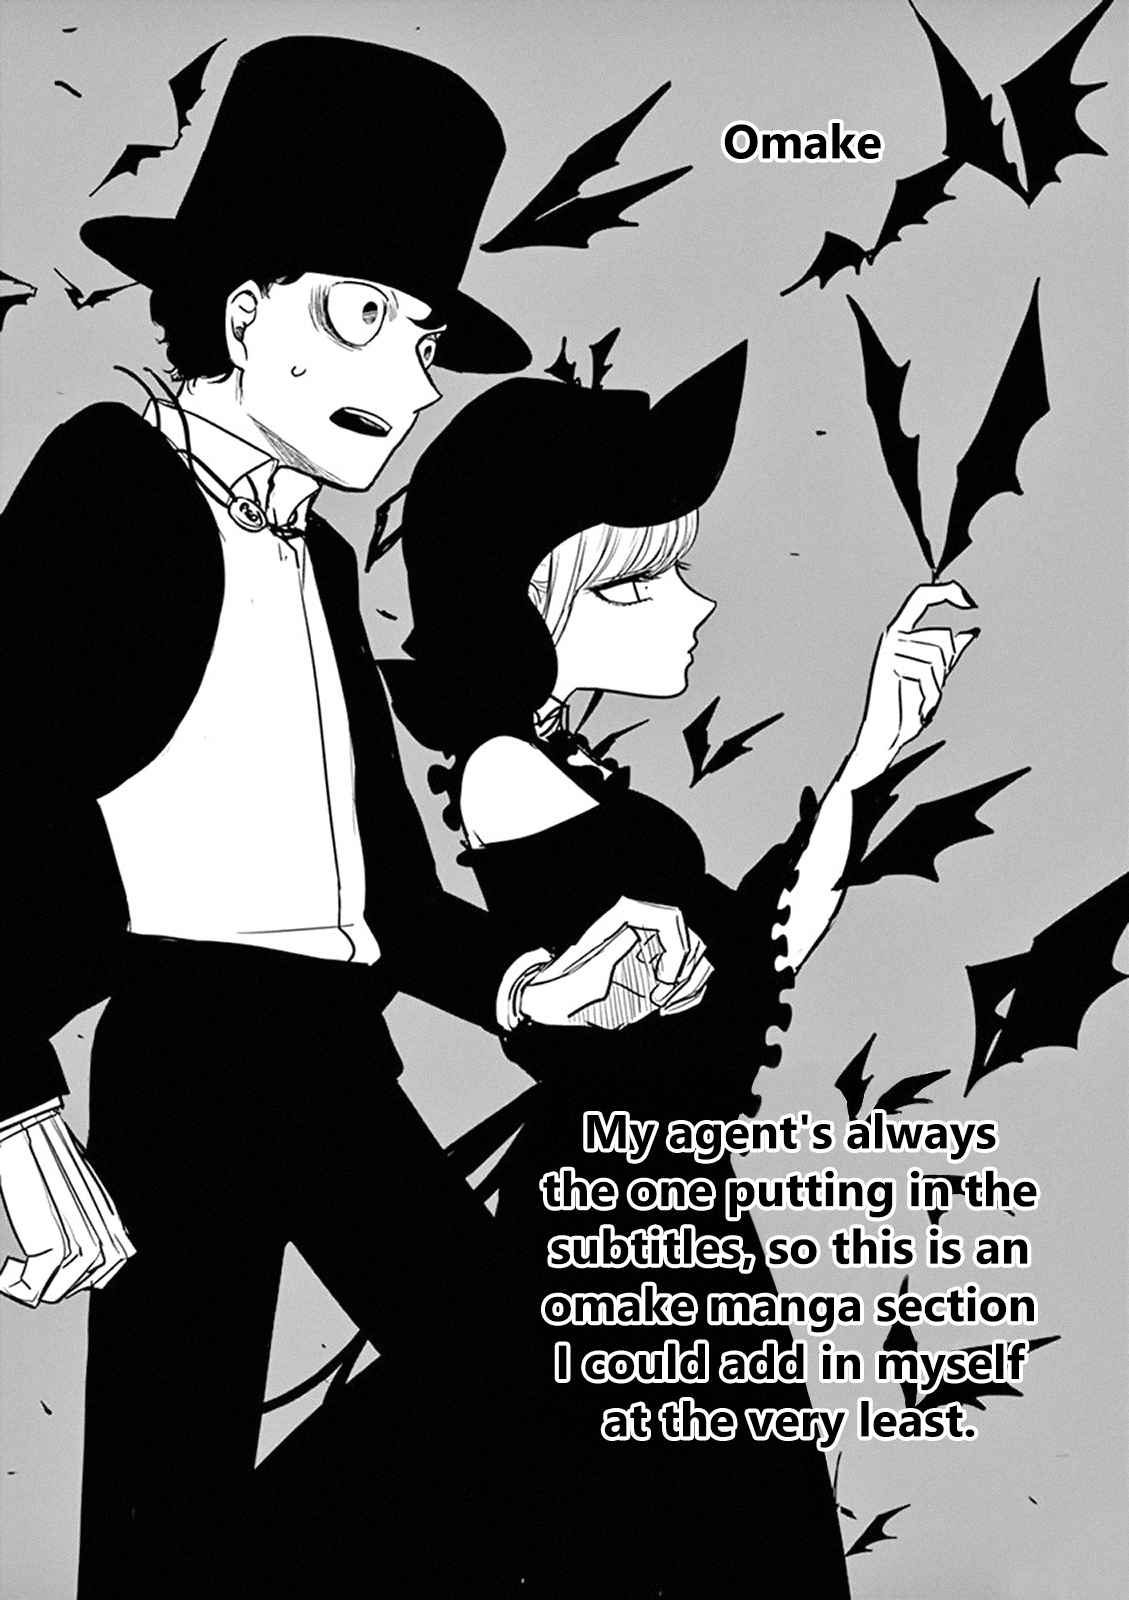 The Duke of Death and His Black Maid Vol. 1 Ch. 14.5 Omake